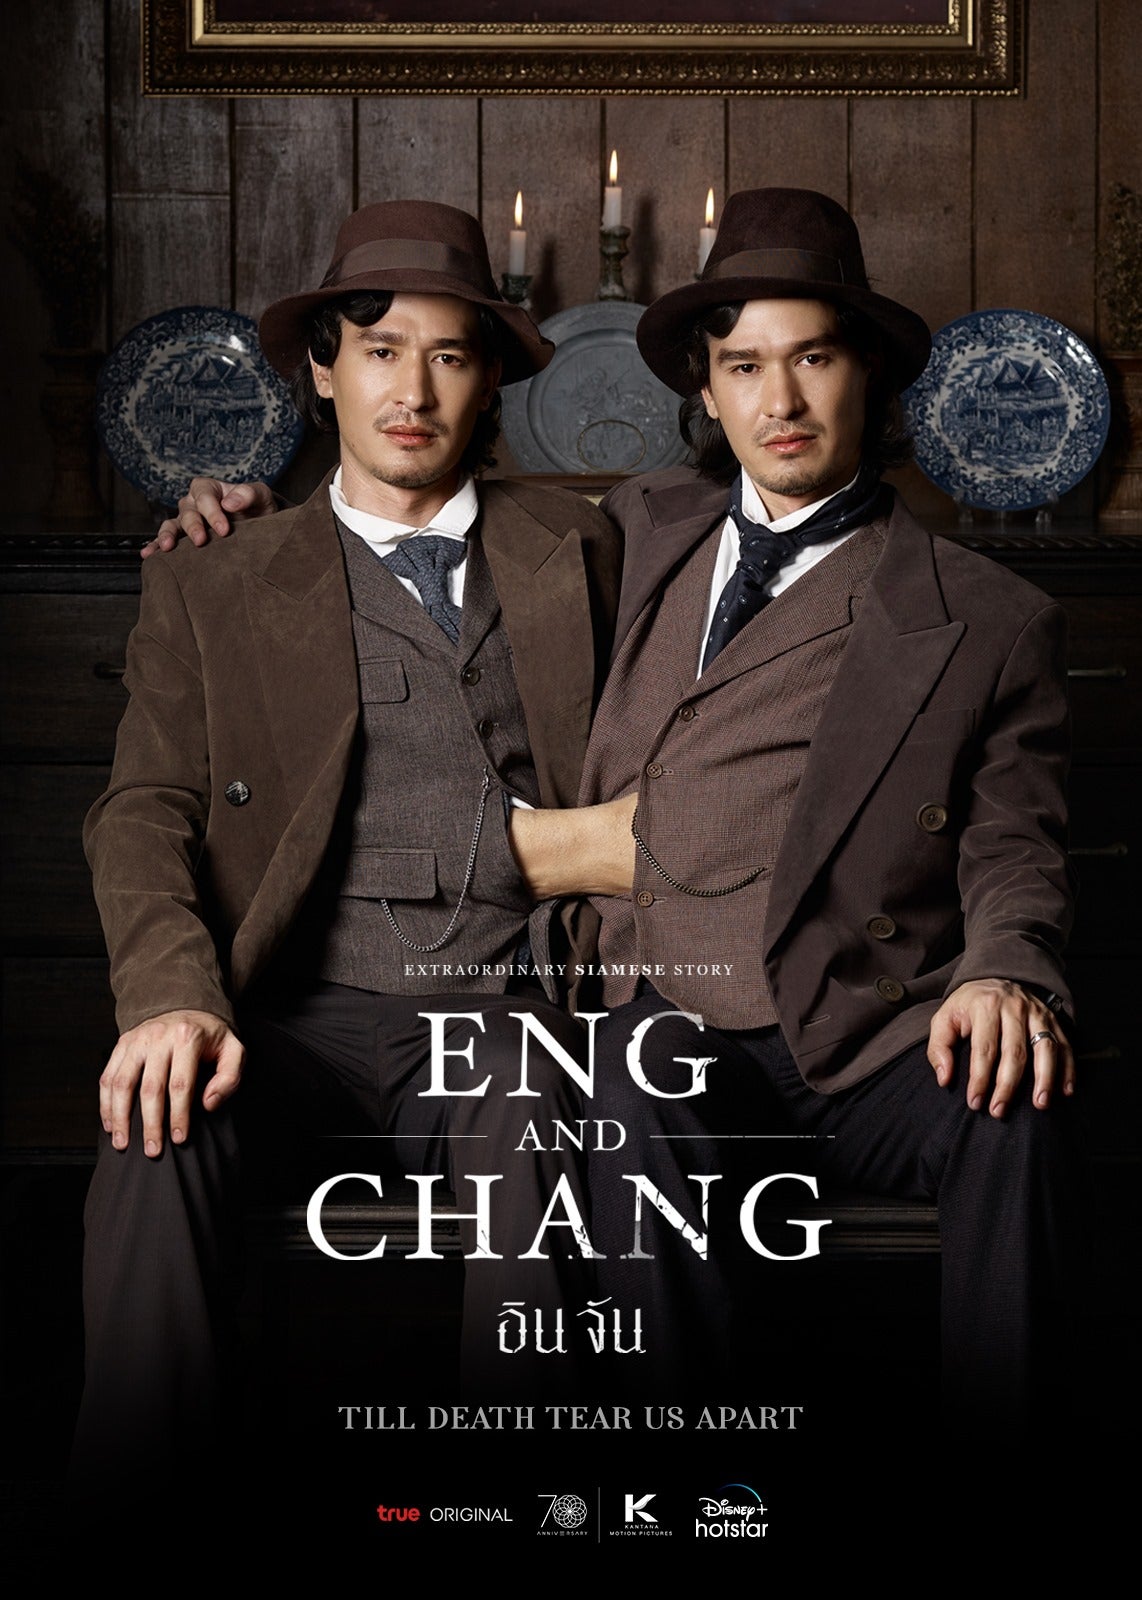 TV ratings for Extraordinary Siamese Story: Eng And Chang (อินจัน) in Argentina. Disney+ TV series